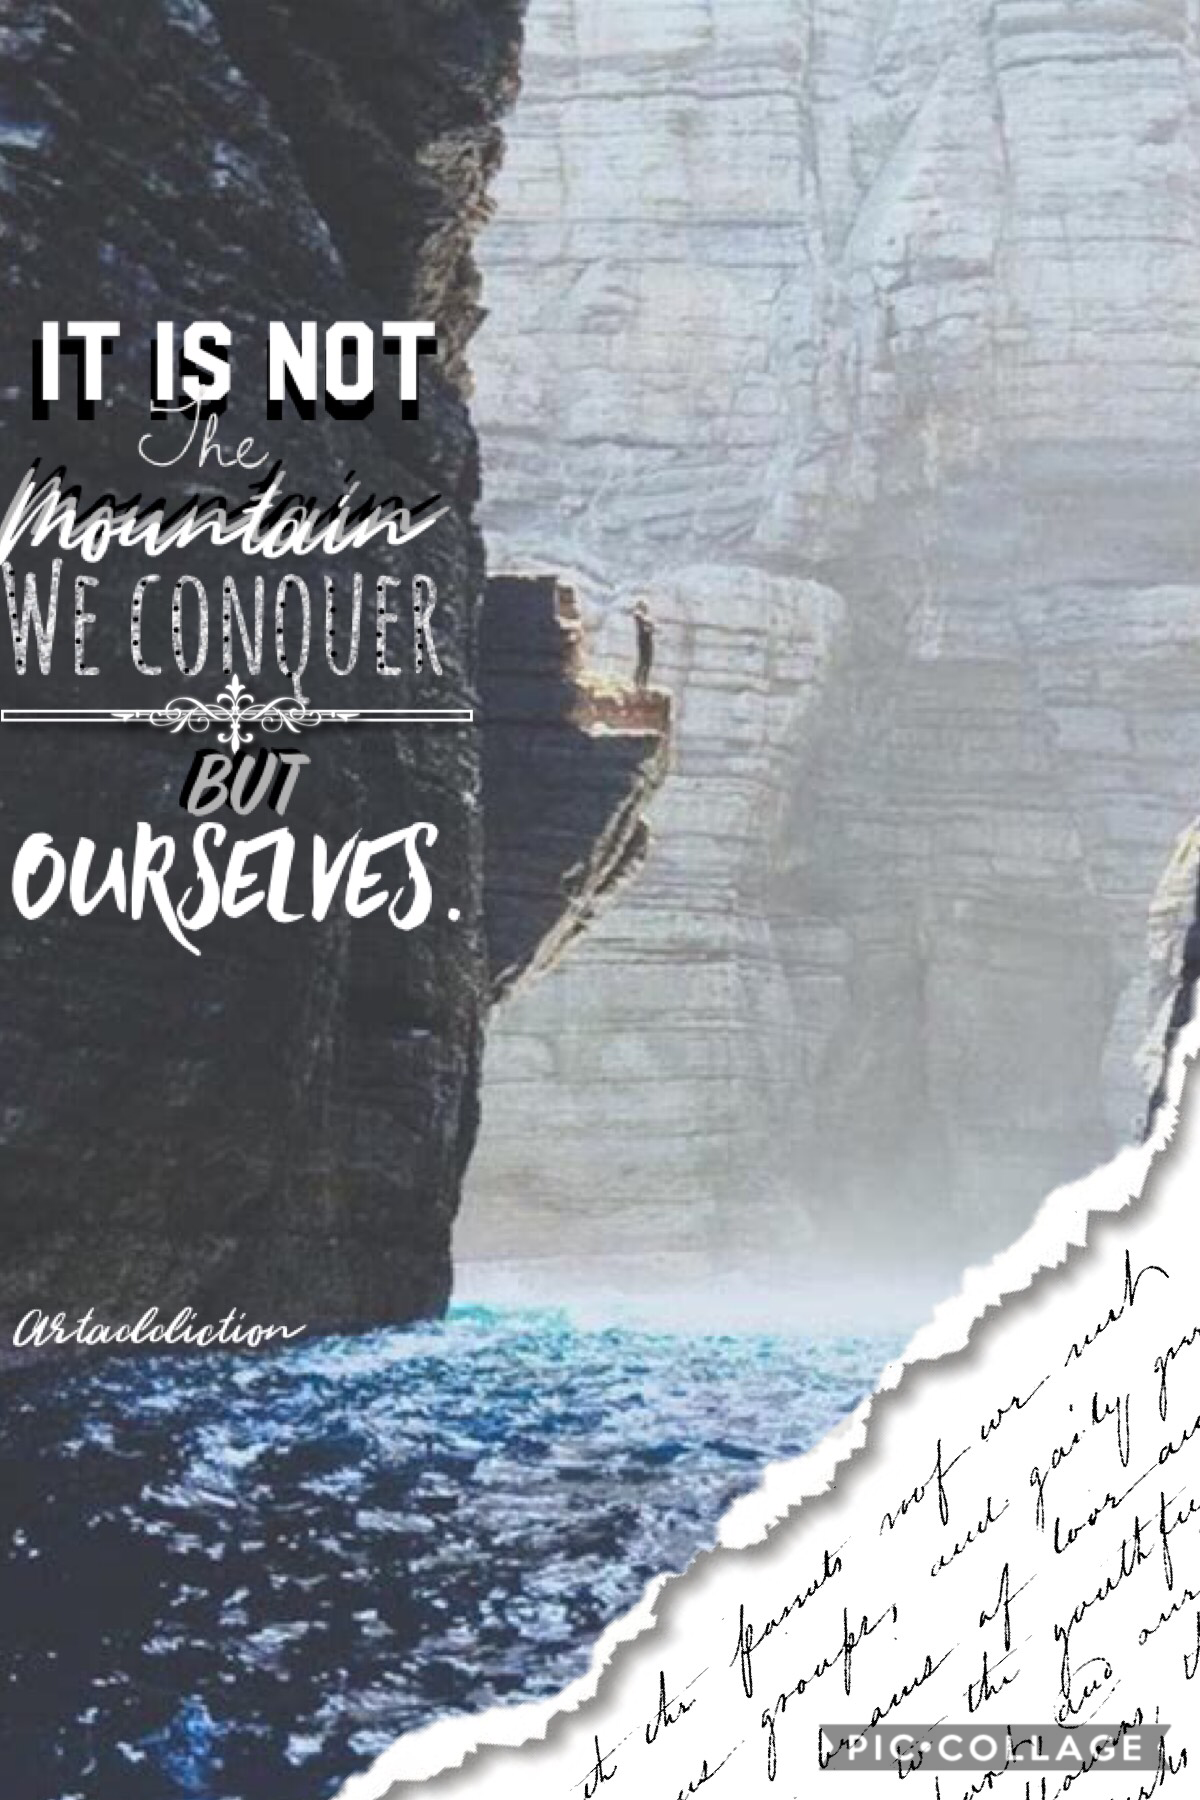 It’s not the mountains that we conquer BUT OURSELVES ❤️